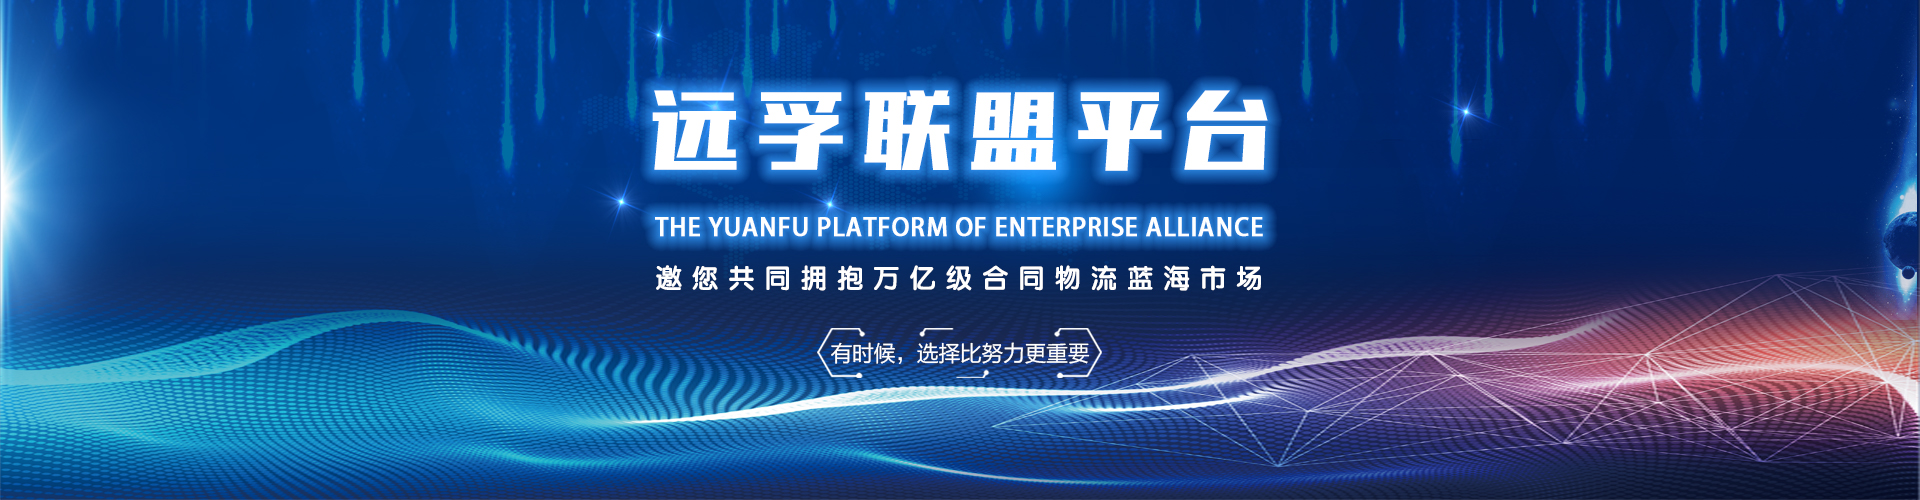 General Chemical Industry_Yuanfu Logistics Group Co.,Ltd.—Serving our customer to focus on core business,win-win on the supply chain【official website】